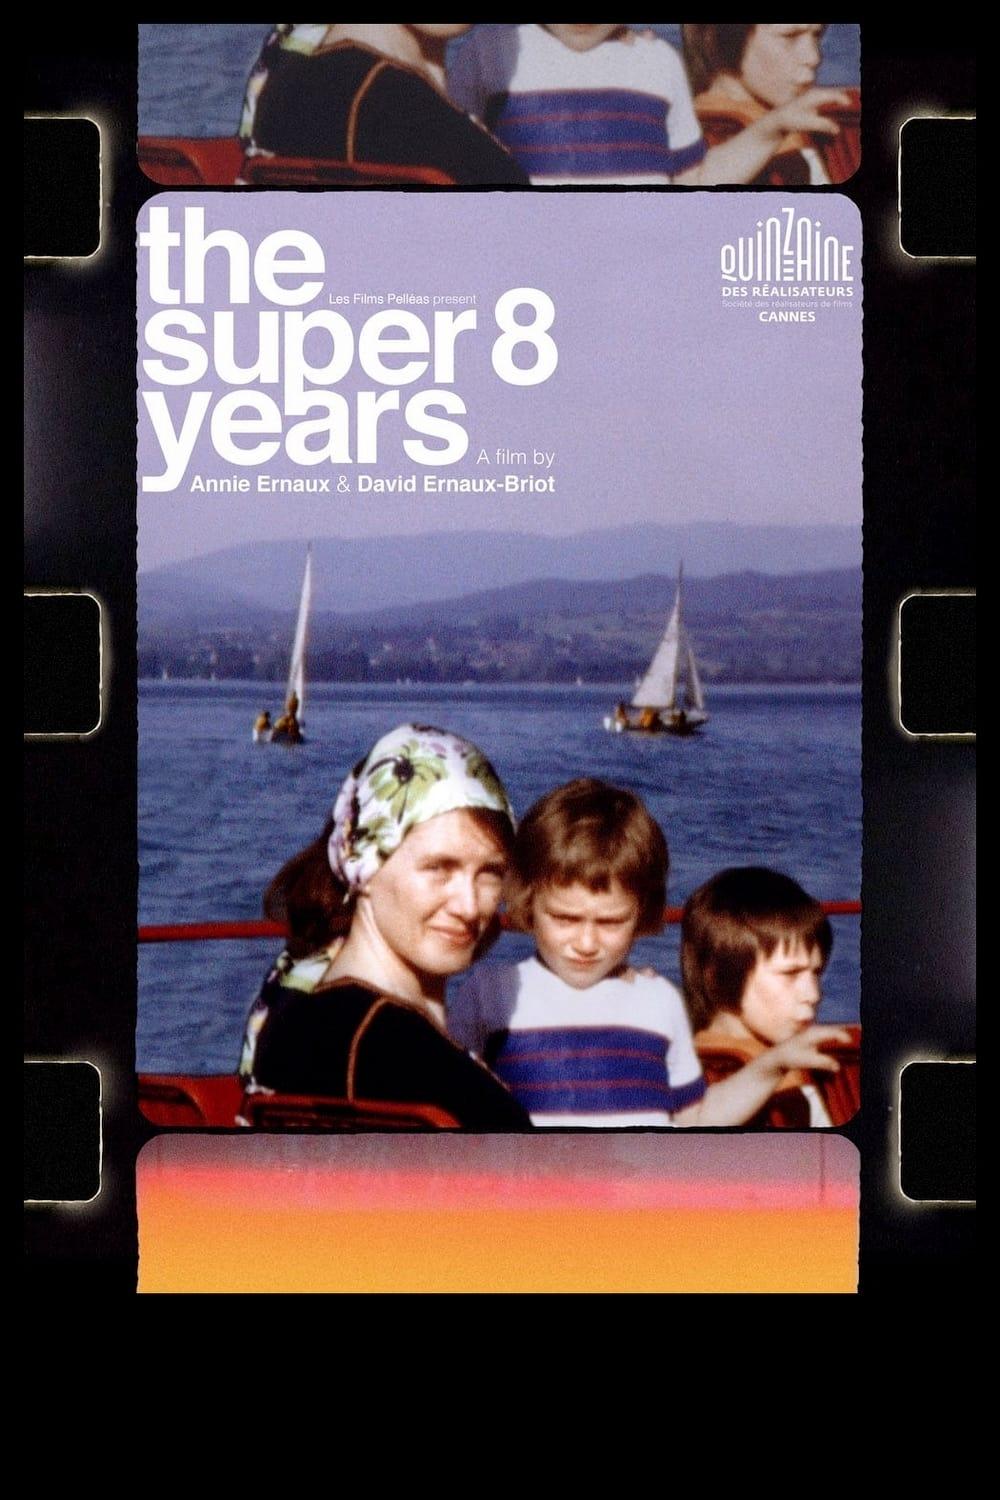 The Super 8 Years poster